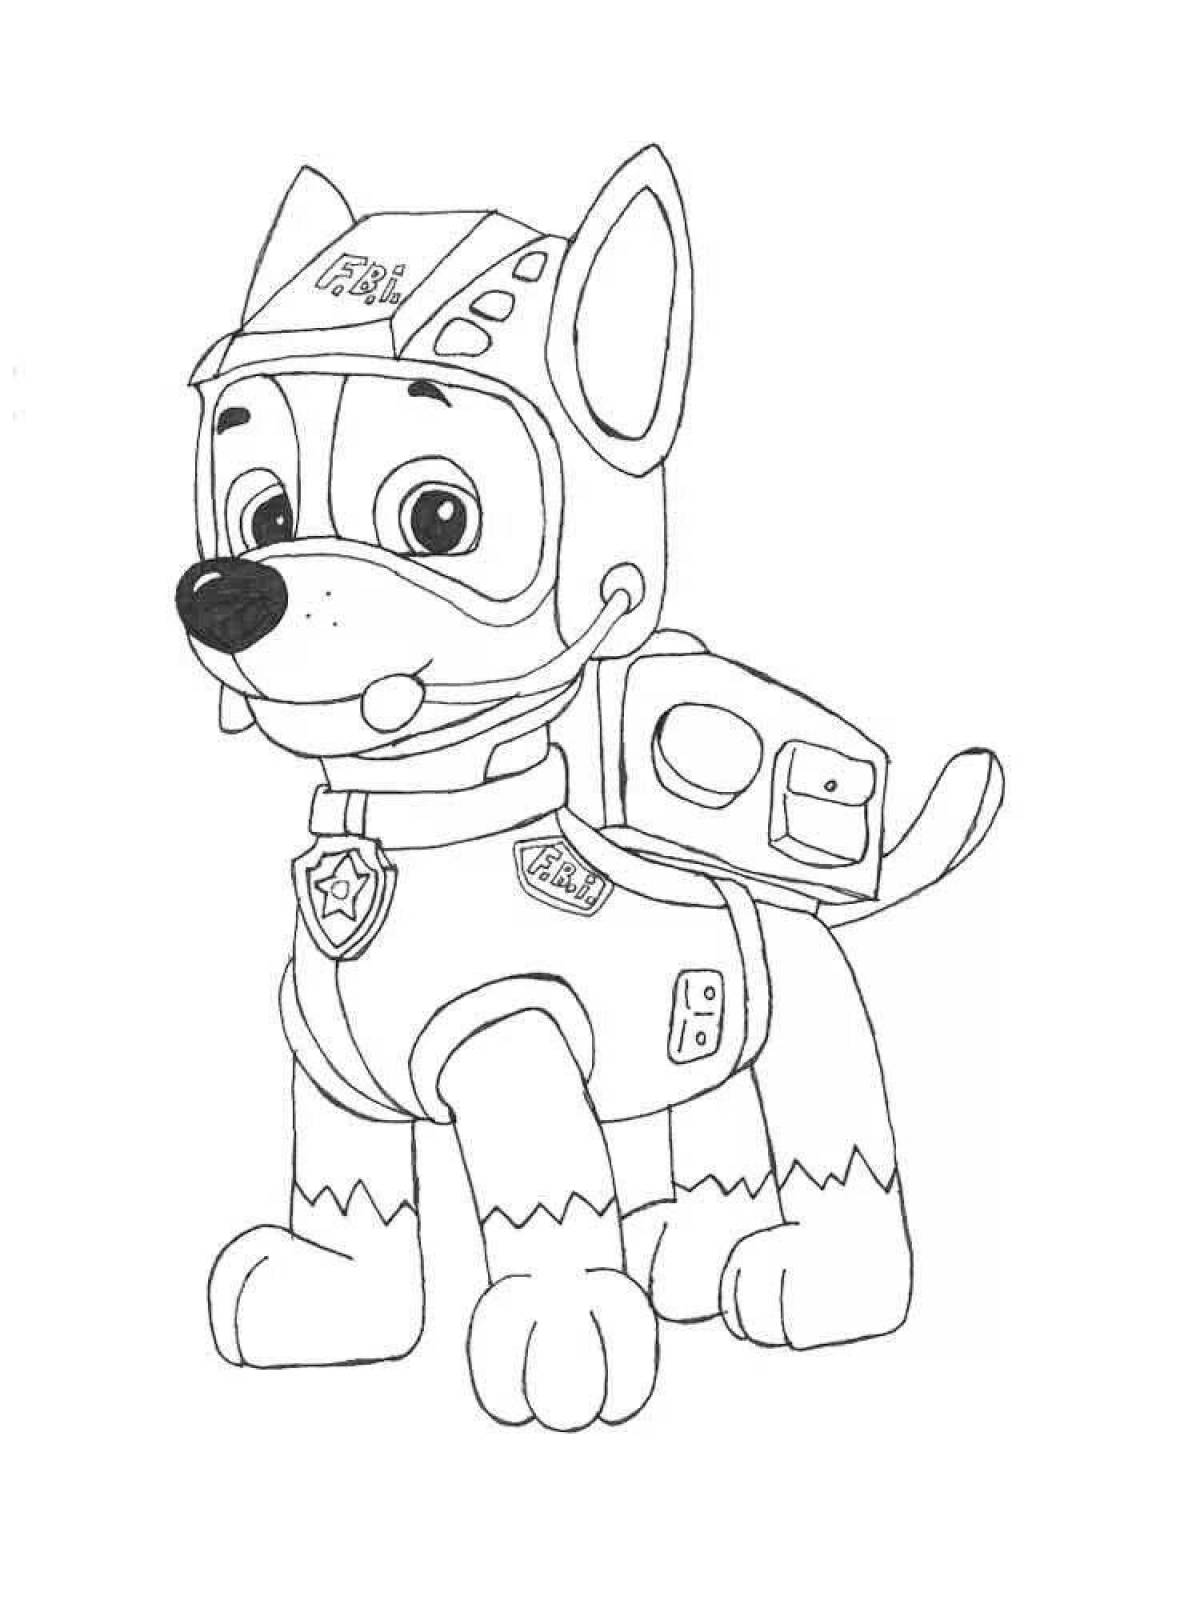 Coloring page glamor racer